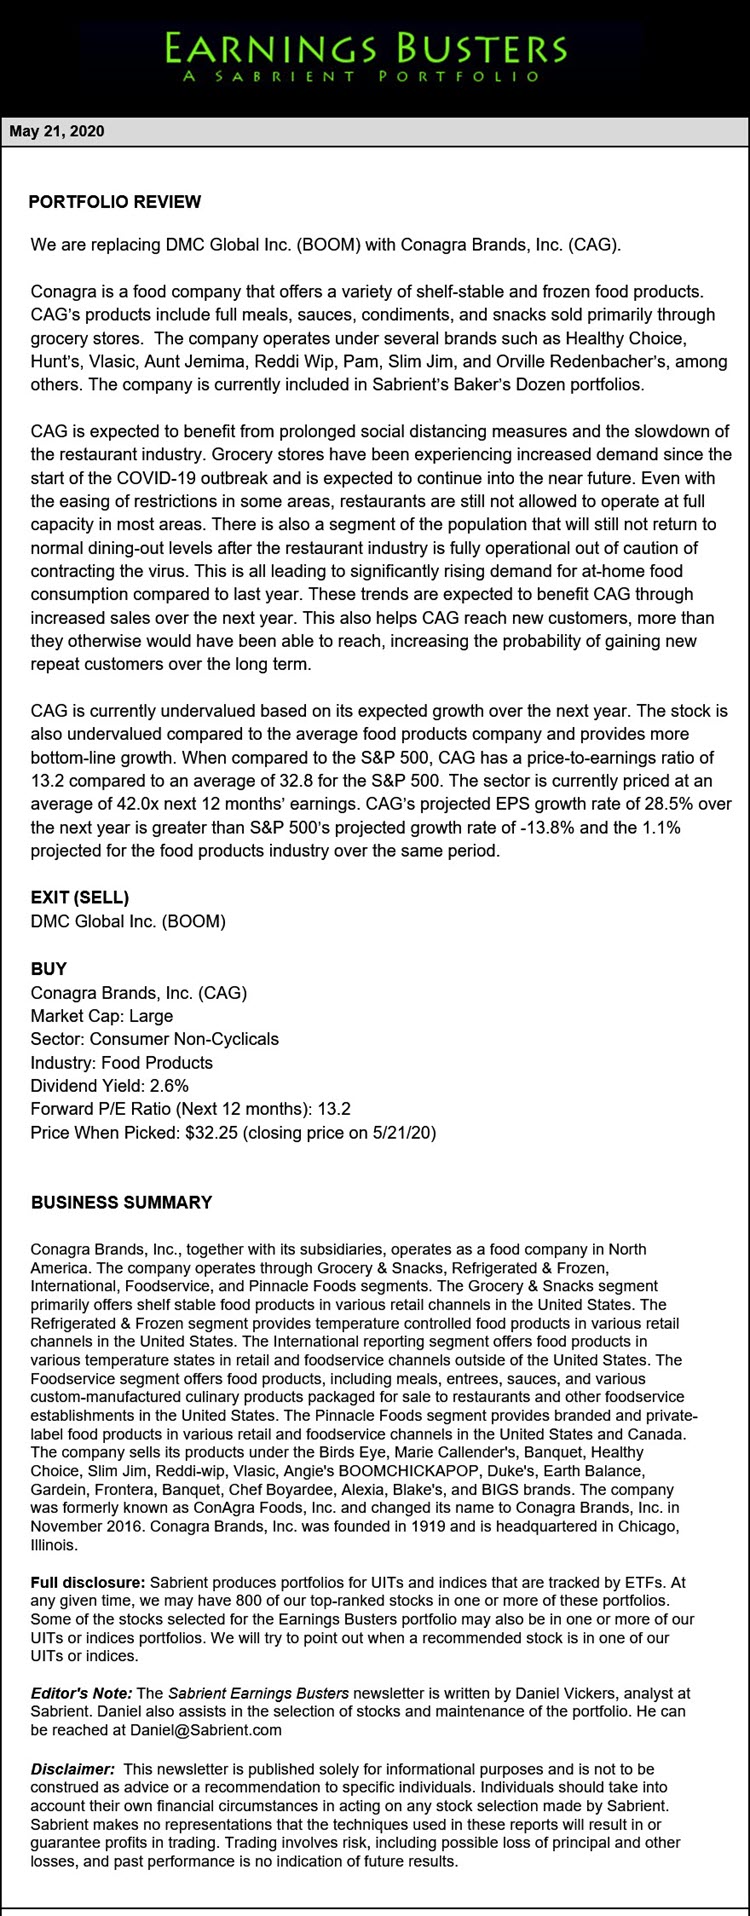 Earnings Busters Newsletter - May 21, 2020